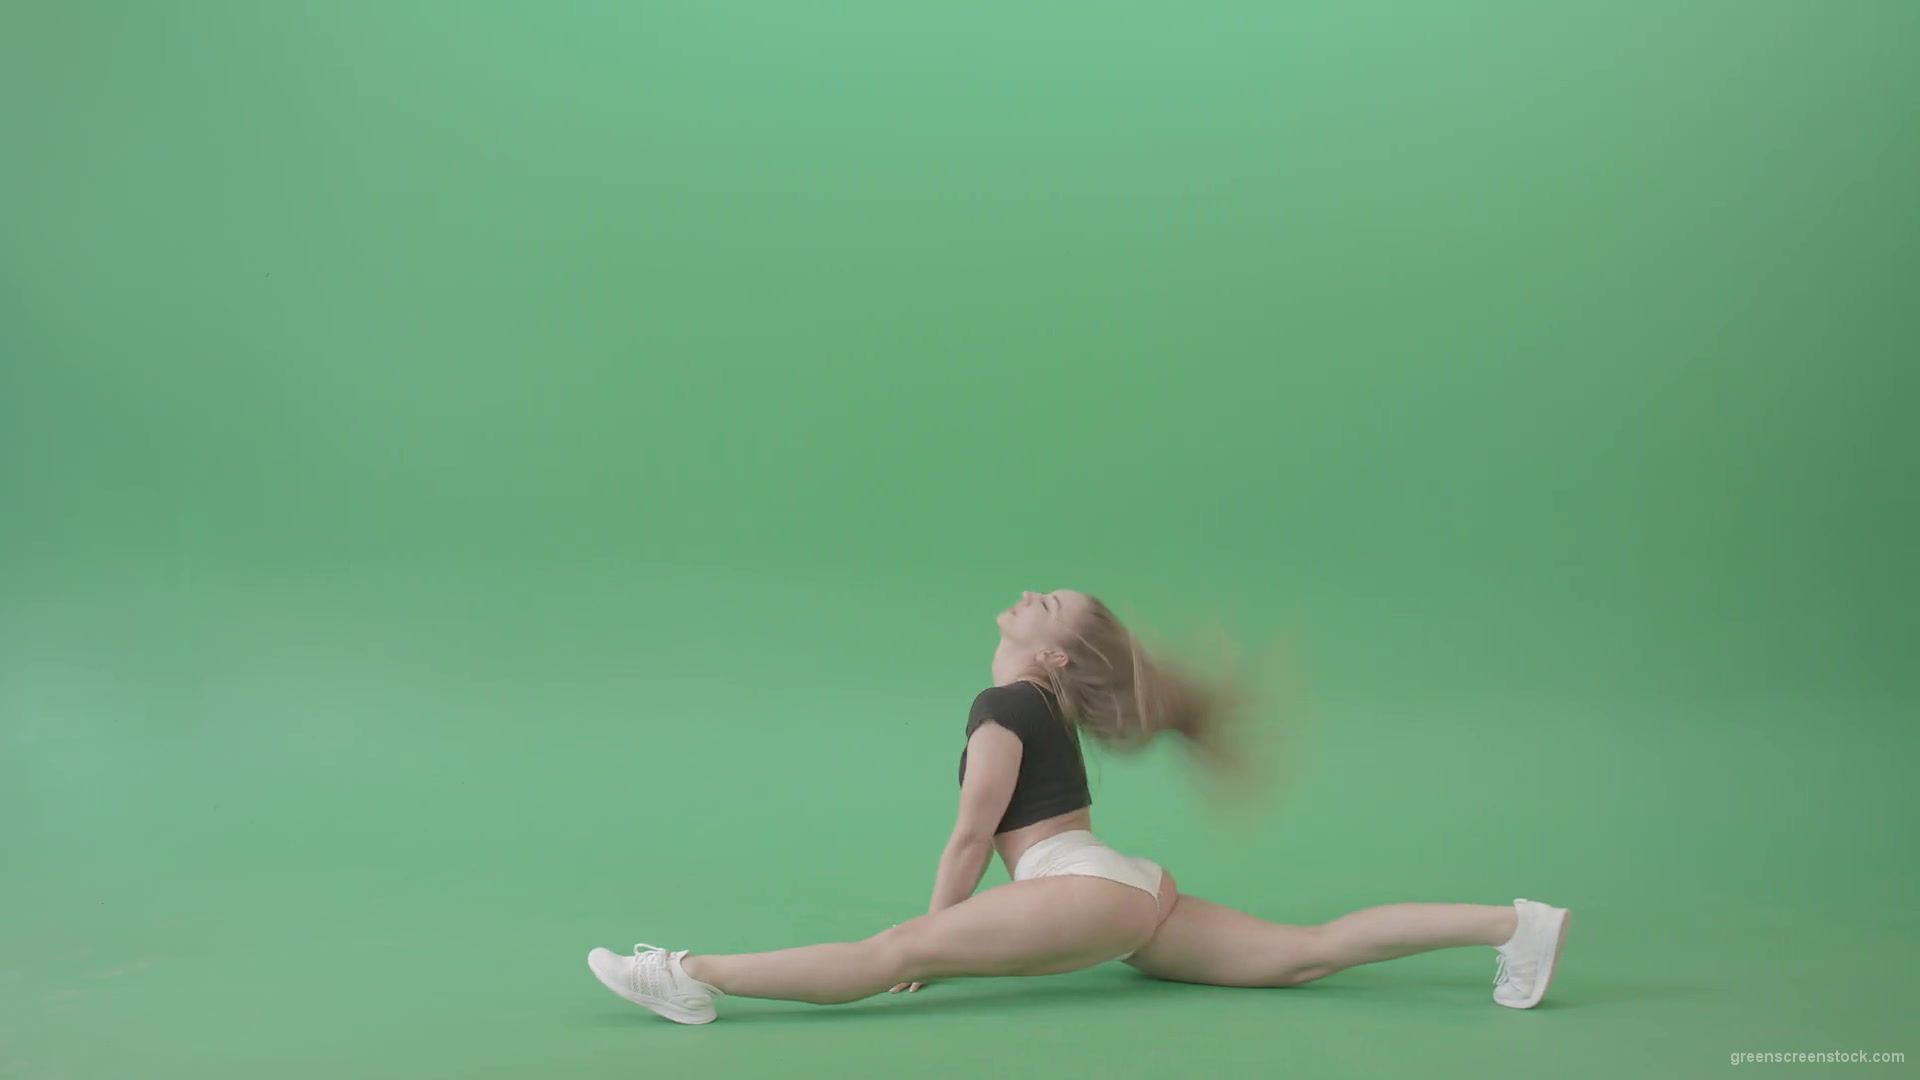 American-girl-twerking-ass-isolated-on-green-background-4k-Video-Footage-1920_009 Green Screen Stock